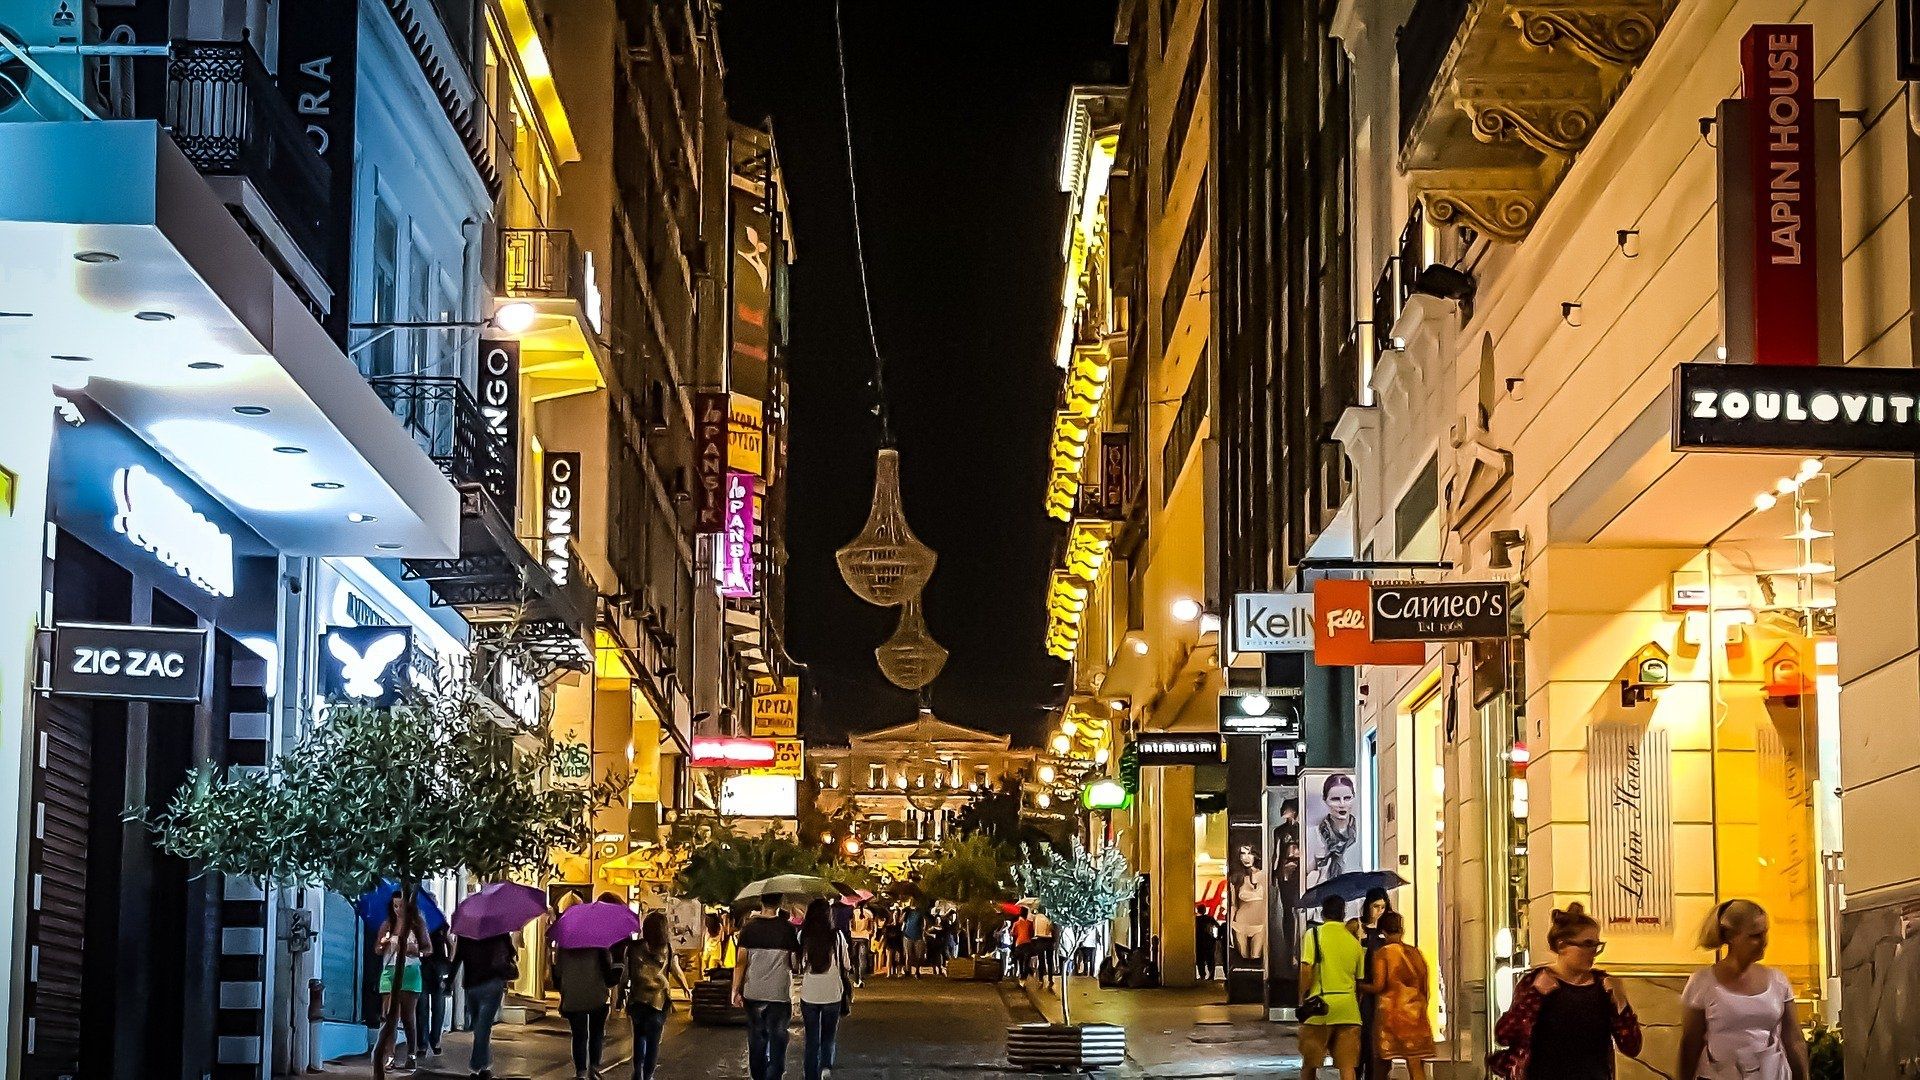 Tours in Athens - Athens by night Tour